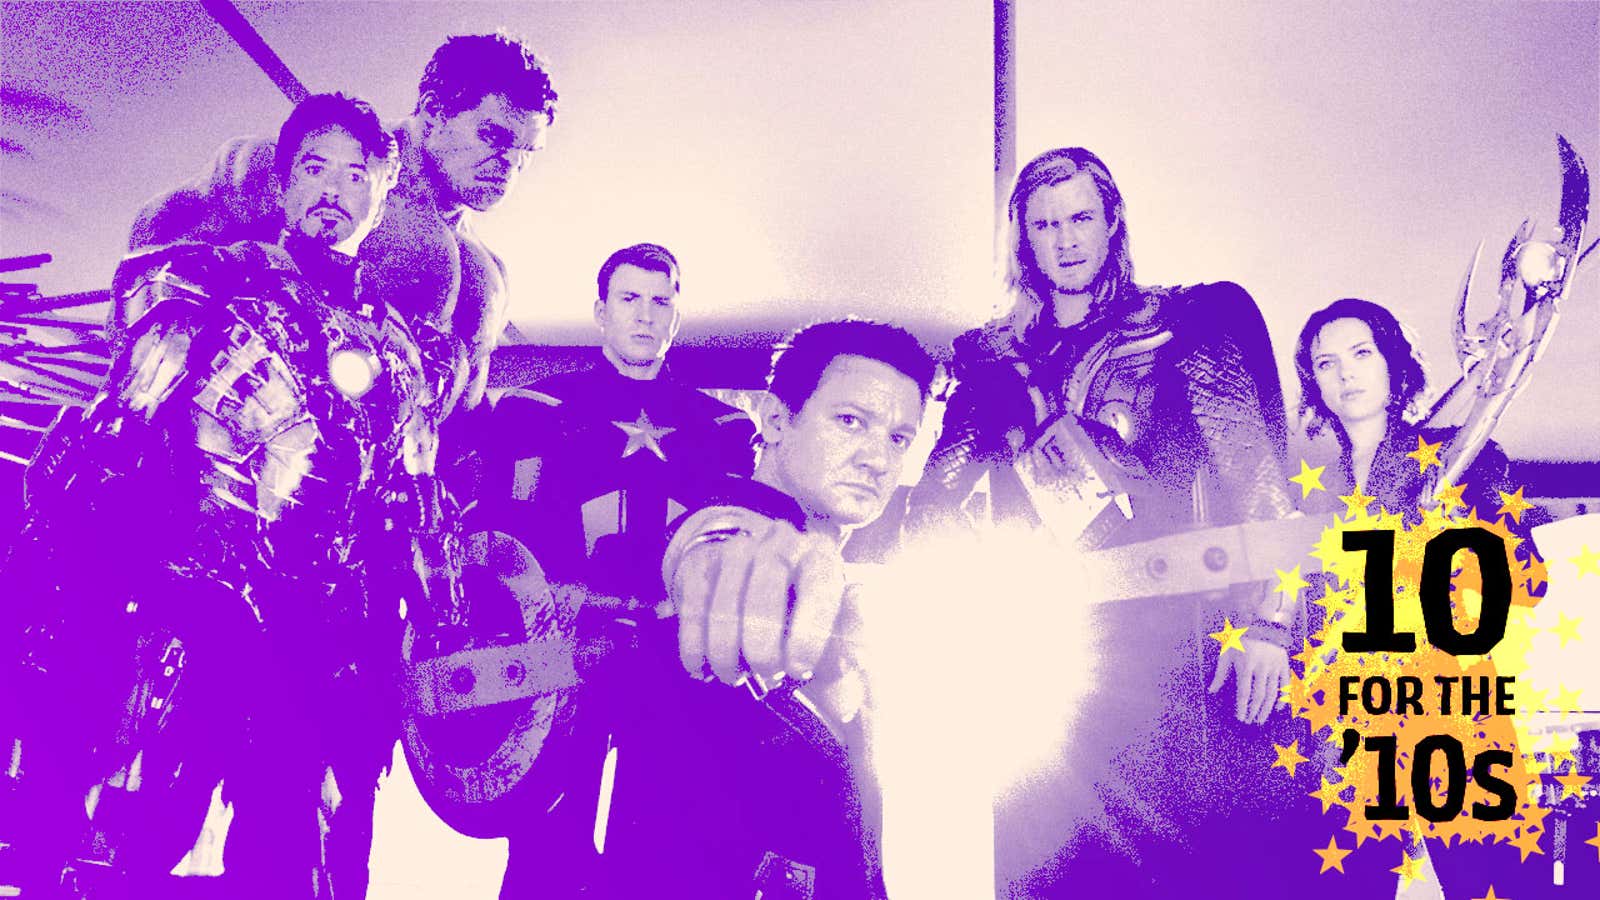 <i>The Avengers</i> was a cinematic event that can never be repeated